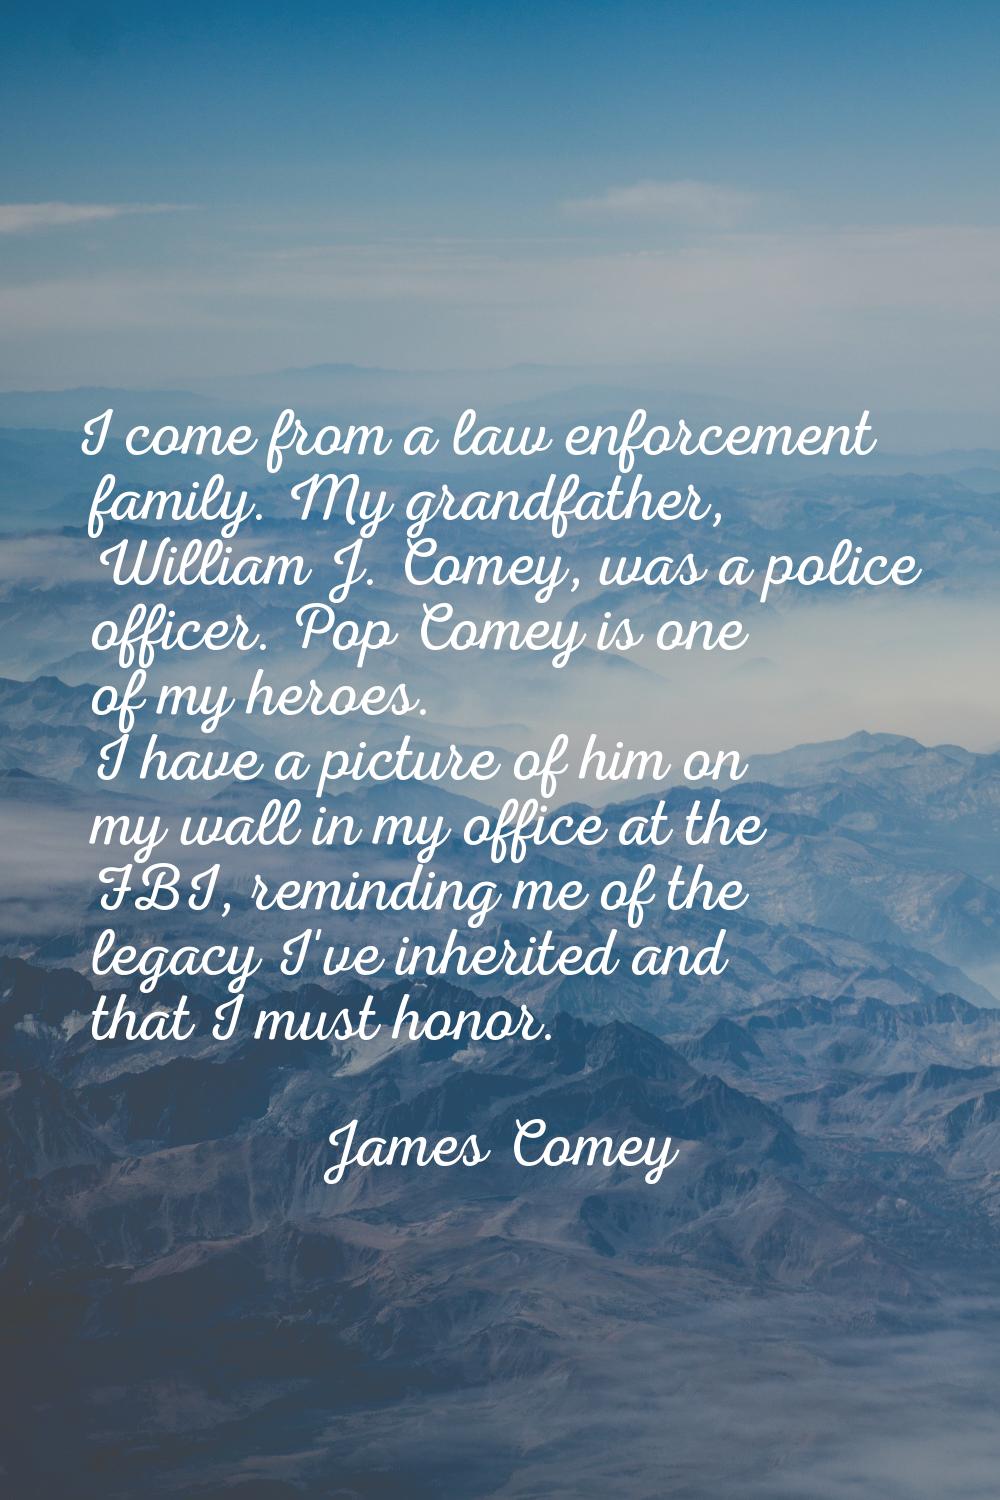 I come from a law enforcement family. My grandfather, William J. Comey, was a police officer. Pop C